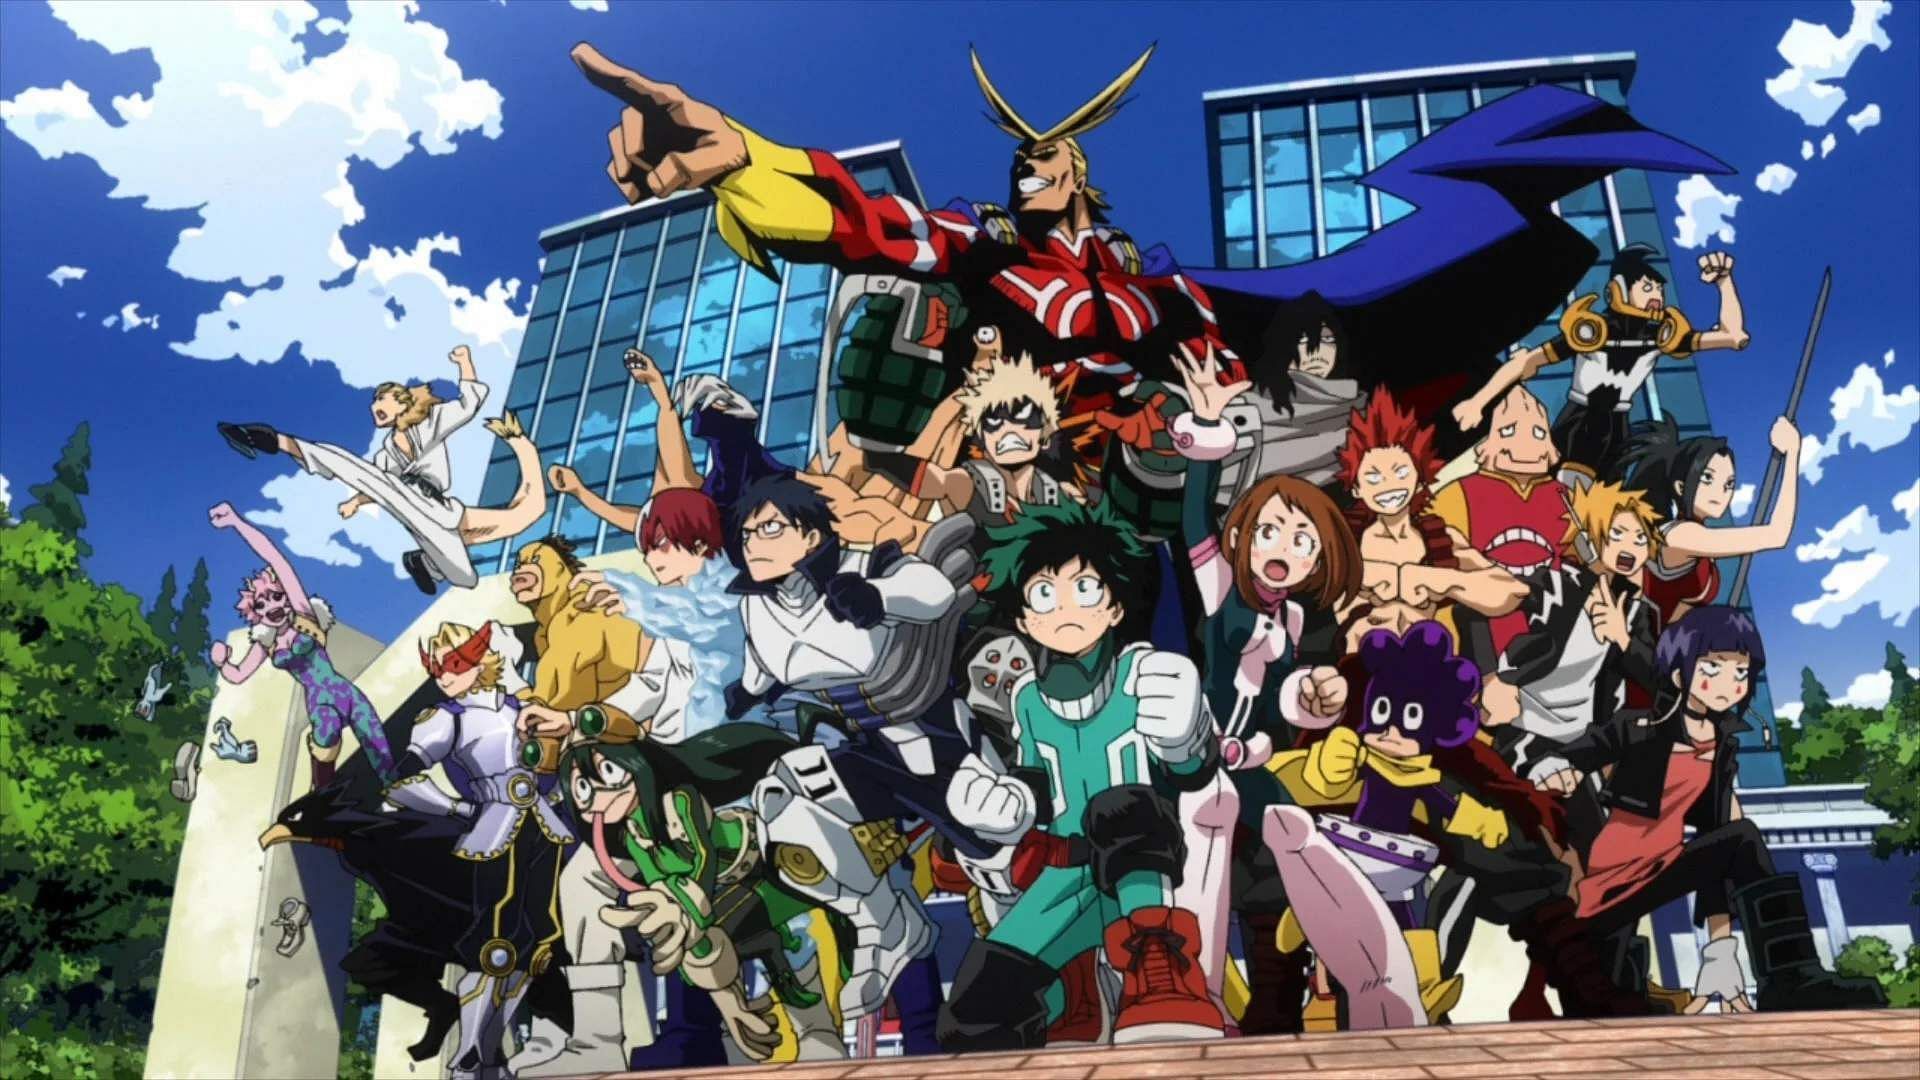 Class 1-A comes to Deku&#039;s rescue in My Hero Academia chapter 421 (Image via BONES)